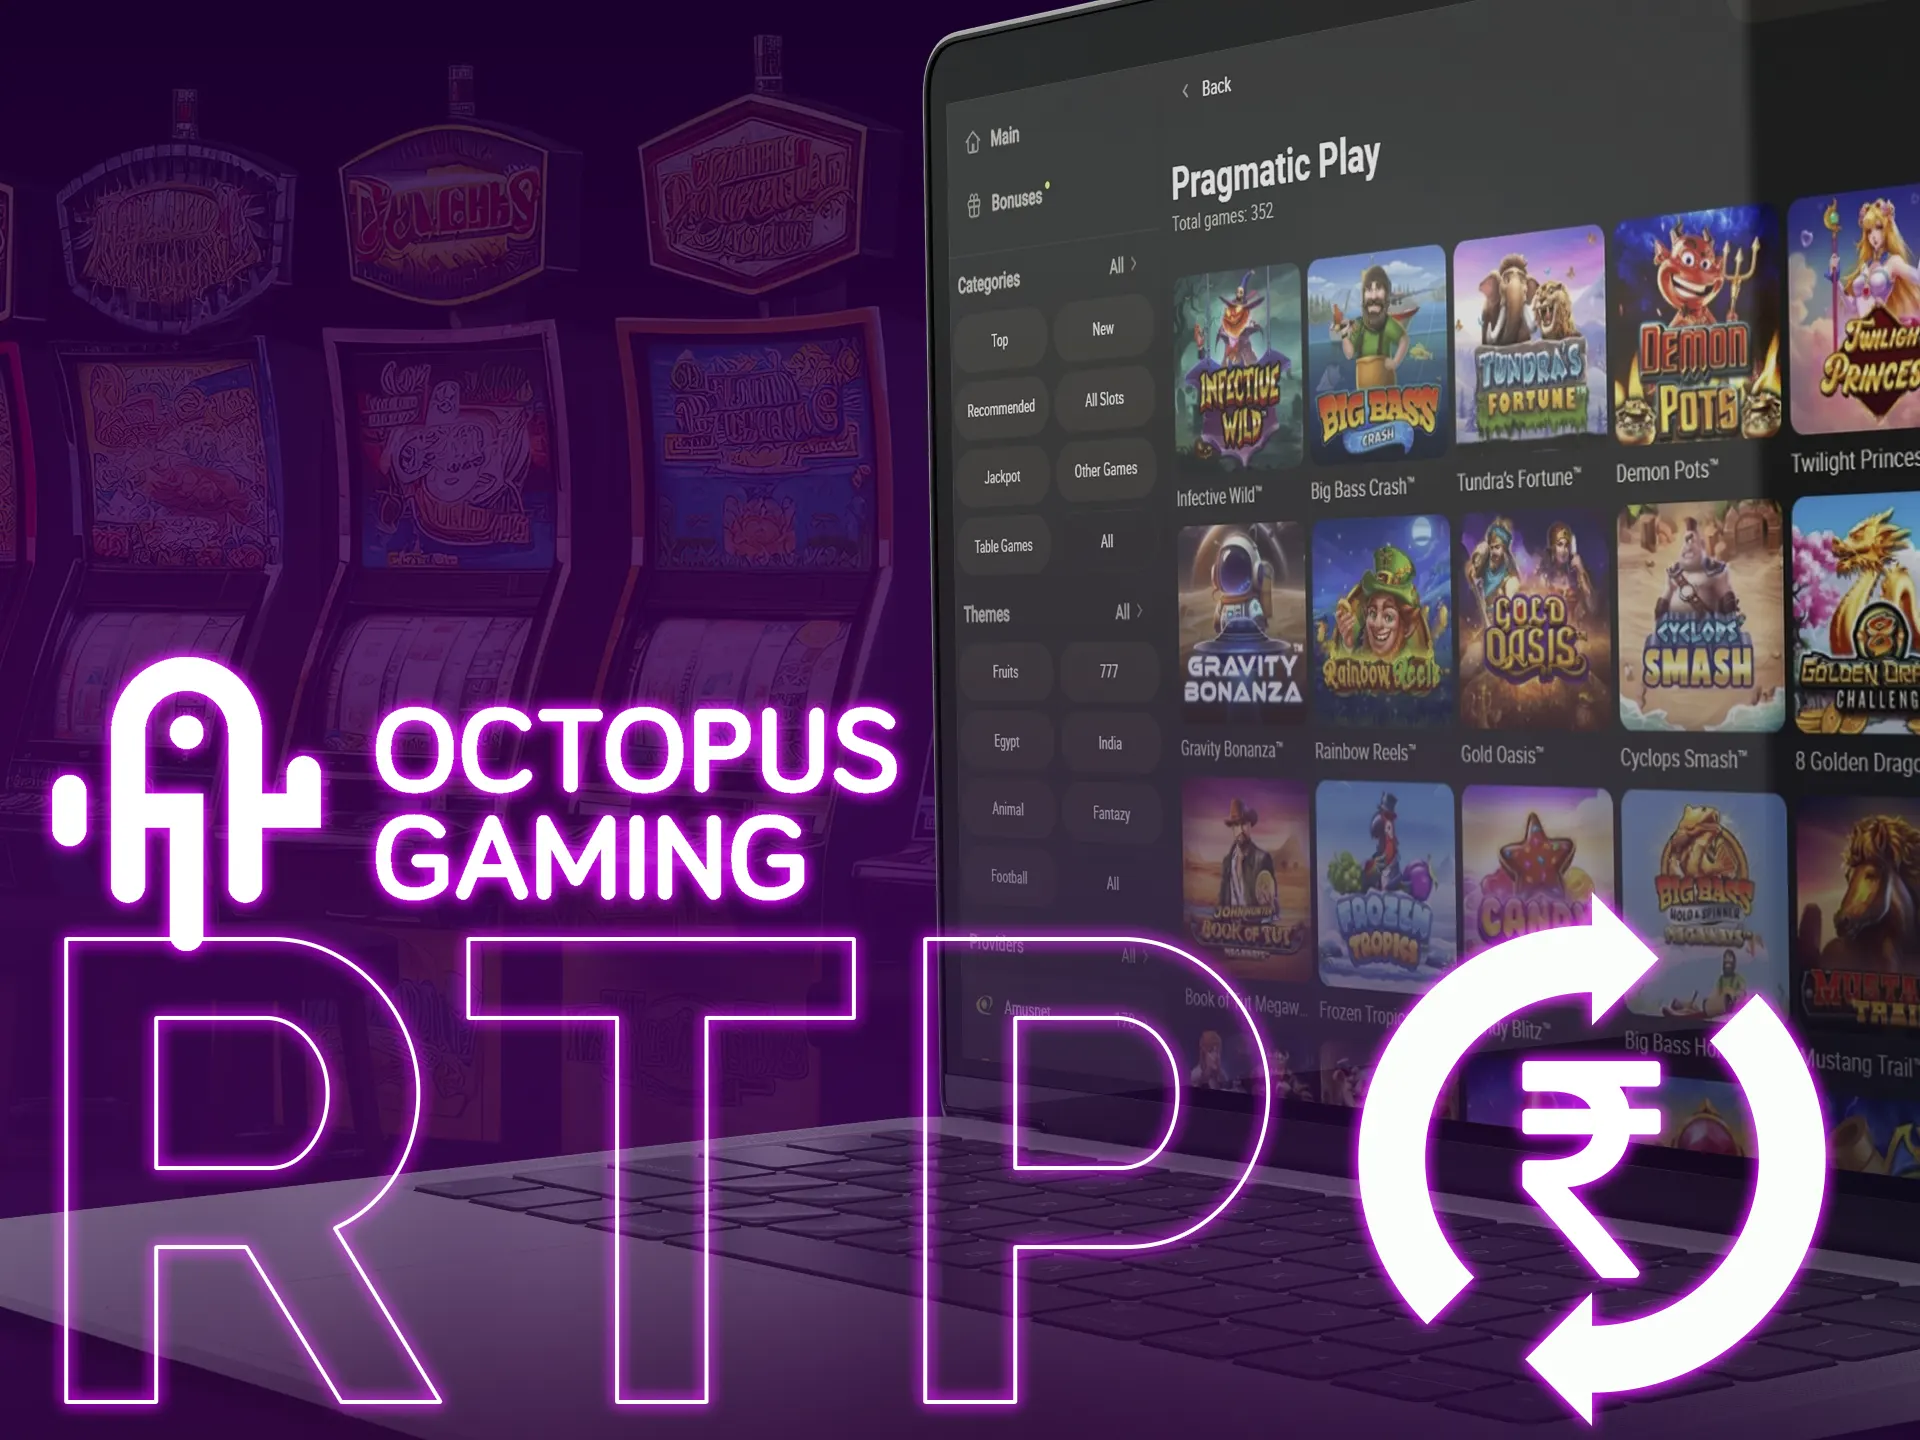 Octopus Gaming giving to players a high rate of RTP.